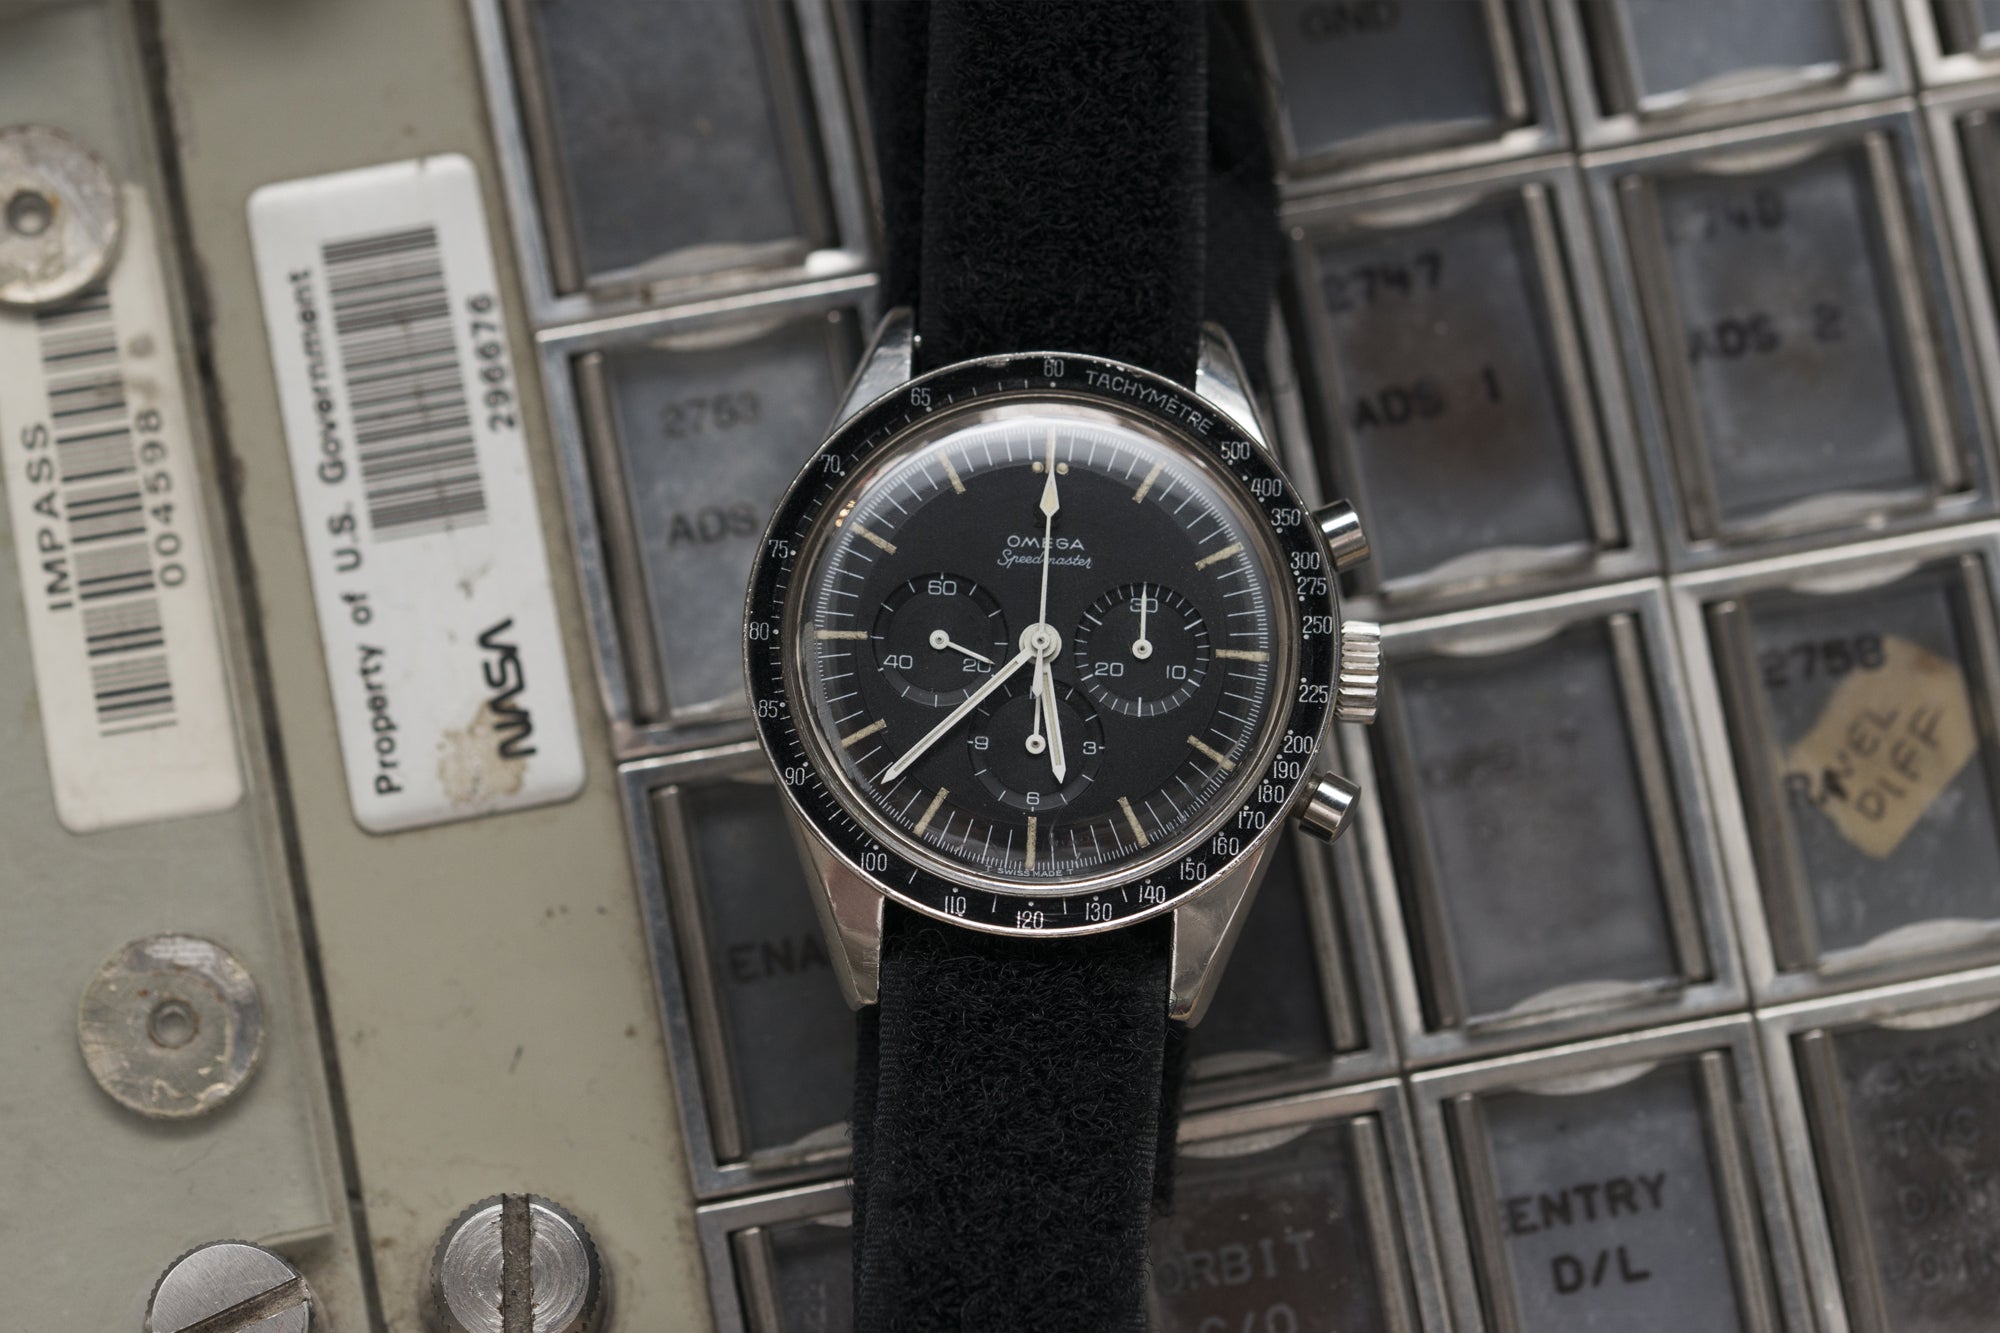 omega watch used by astronauts